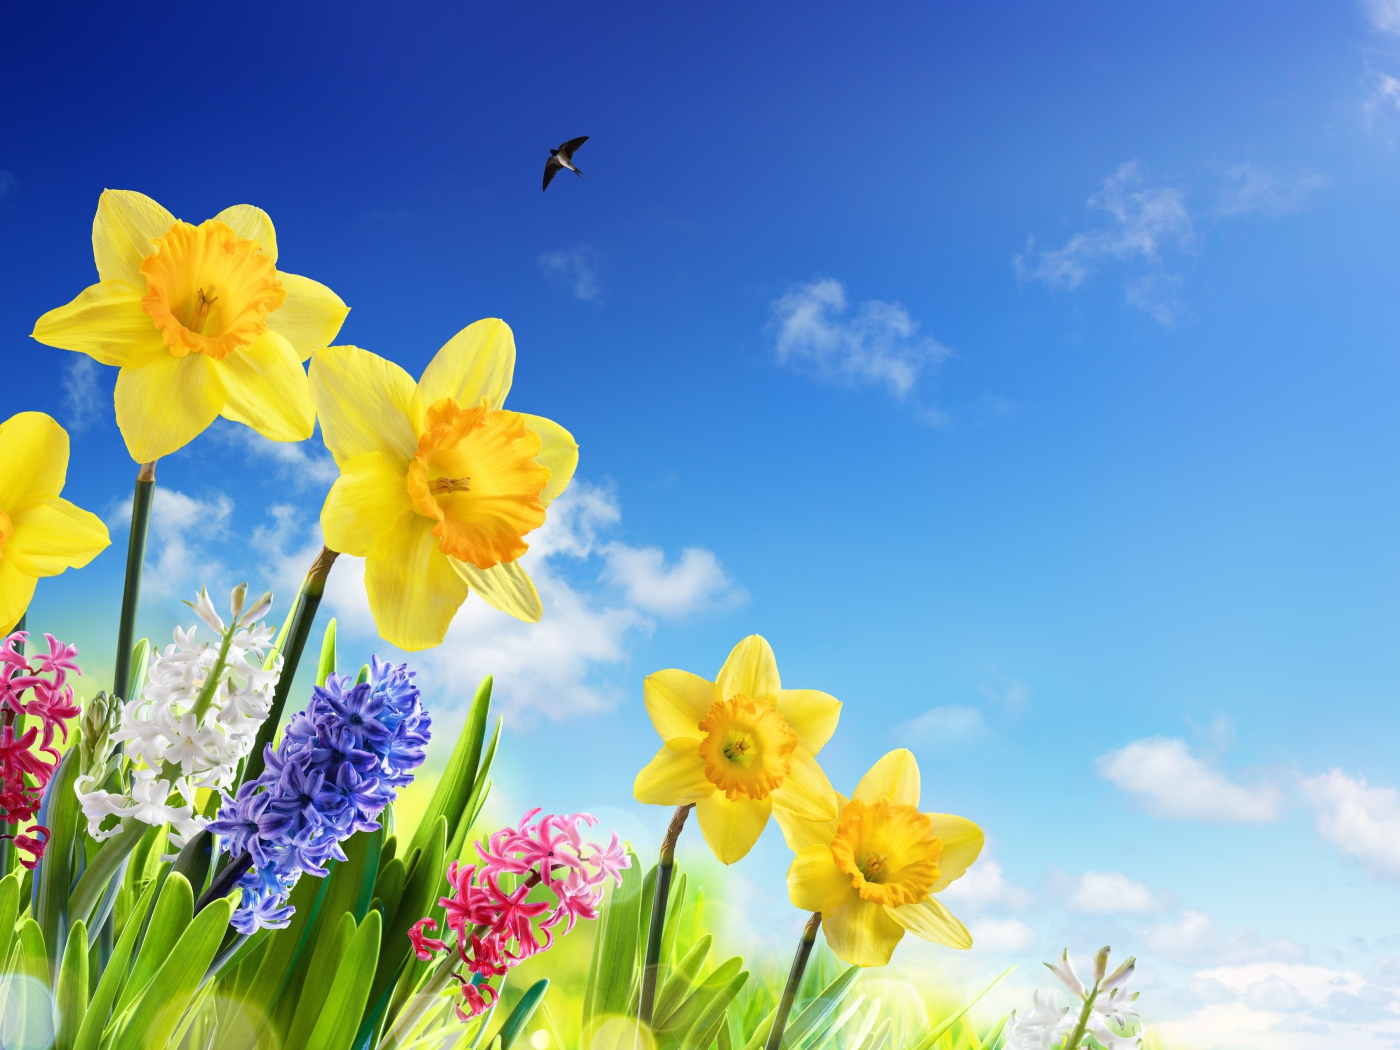 Yellow daffodils and hyacinths against the blue sky